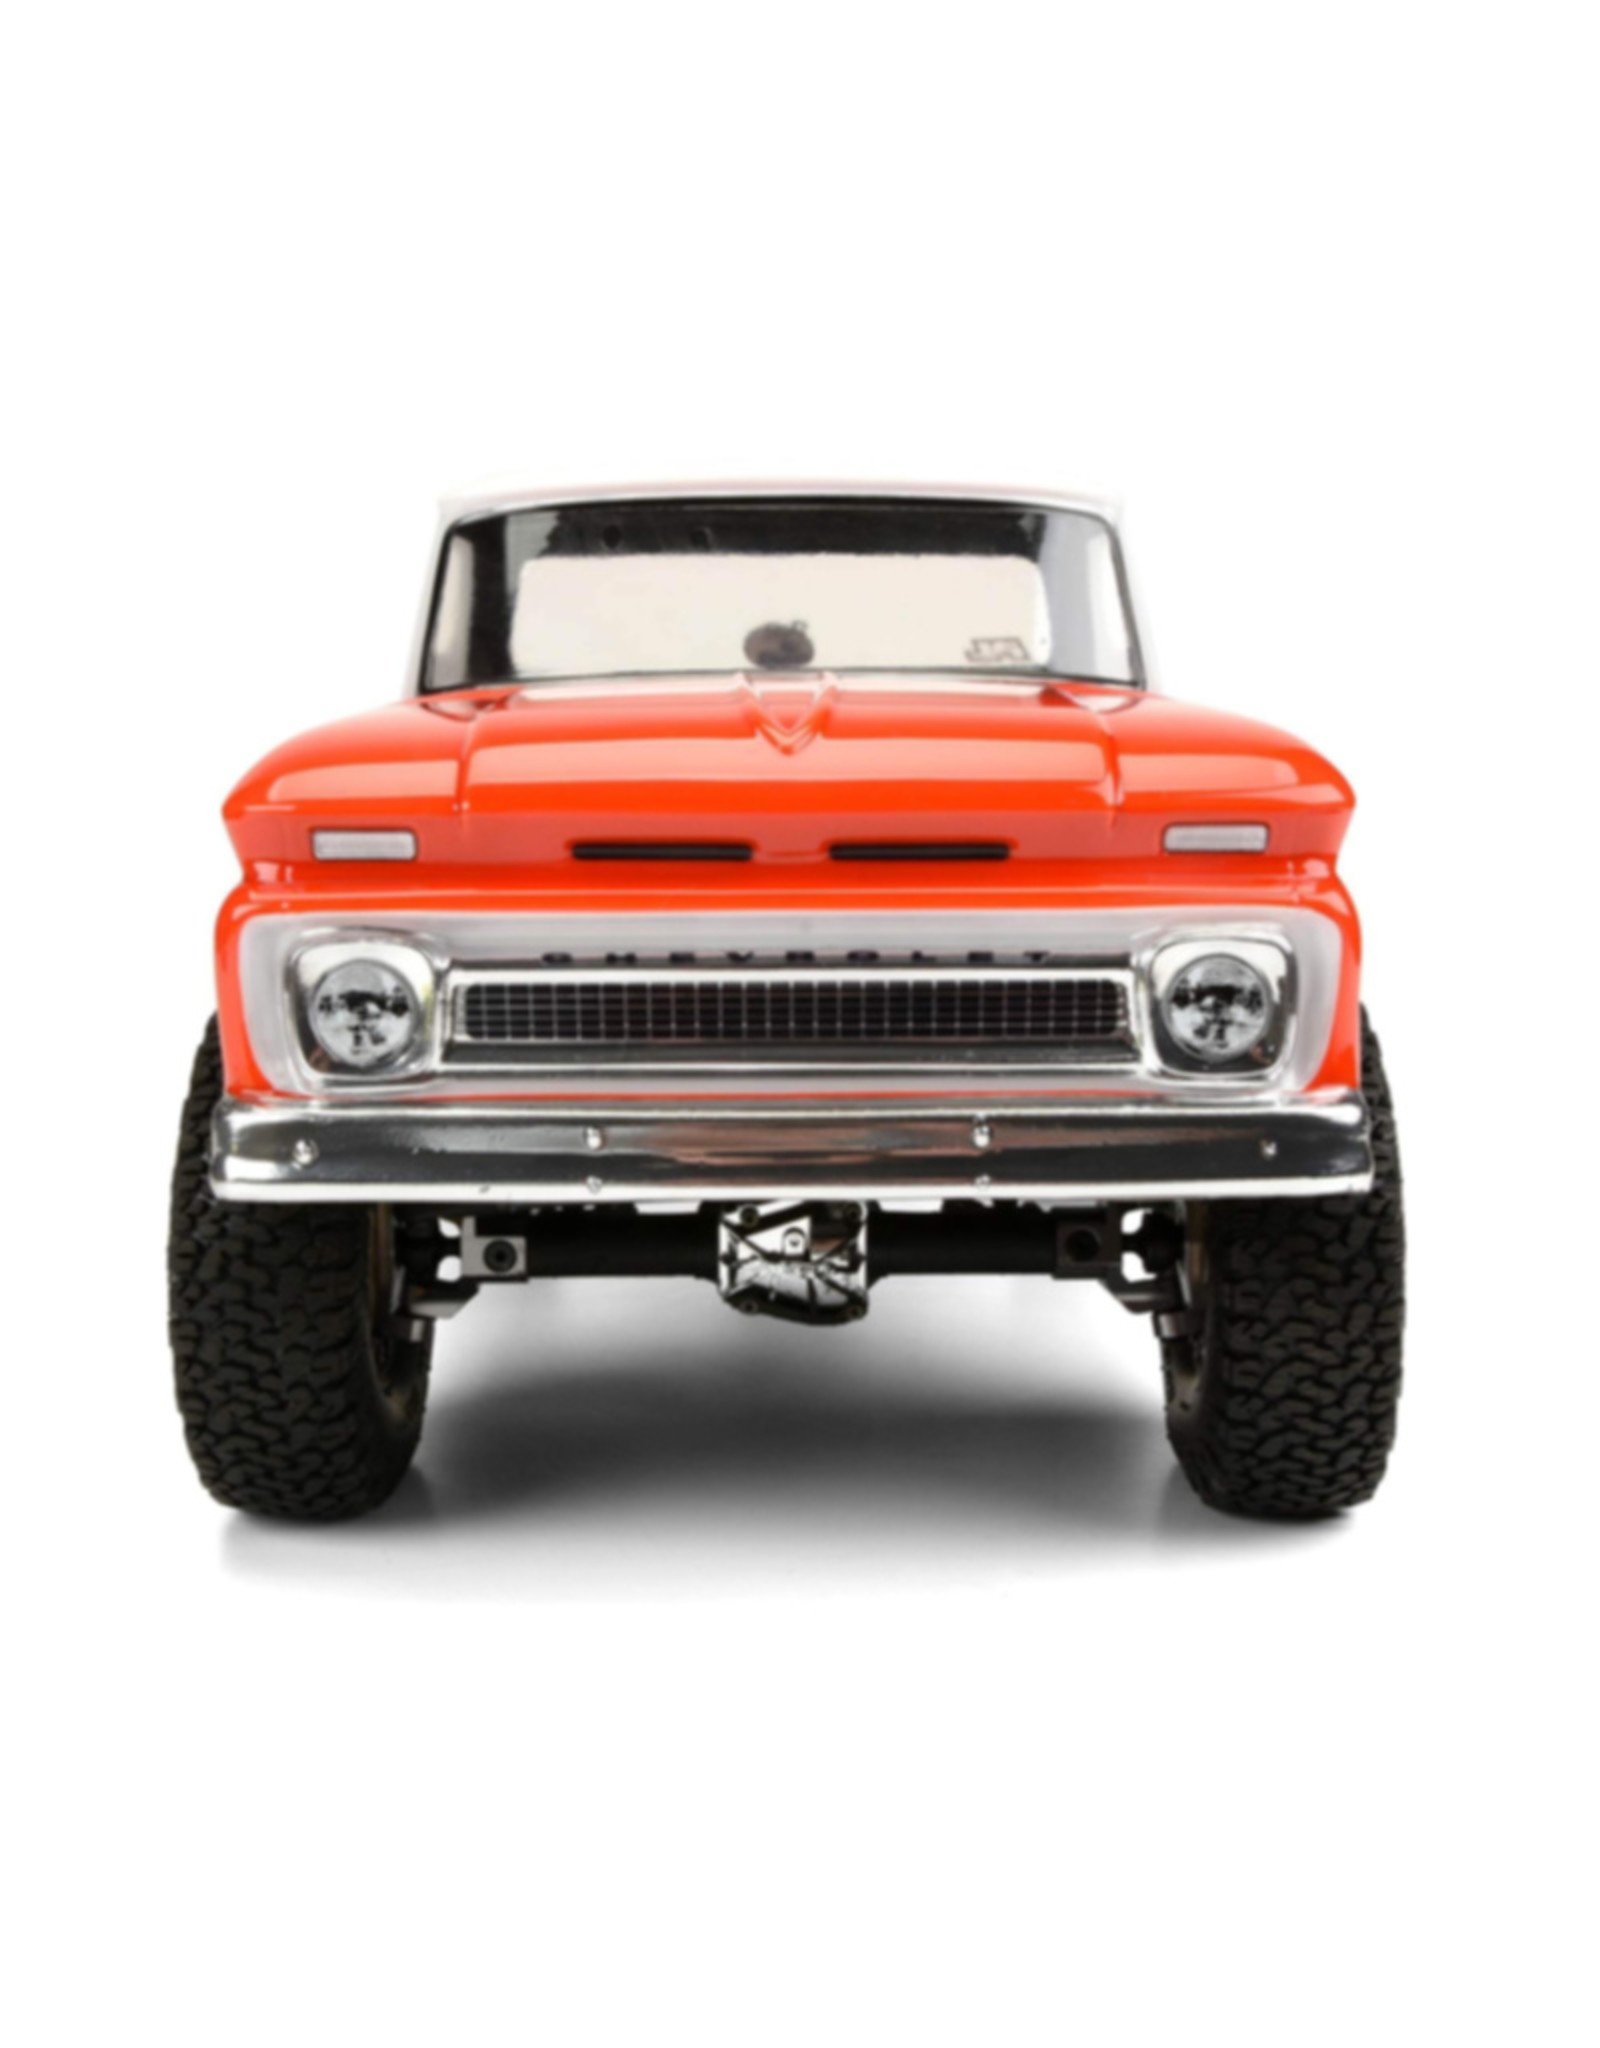 Pro-Line Racing PRO348300 1966 Chevy C-10 Clear Body Trail Honcho